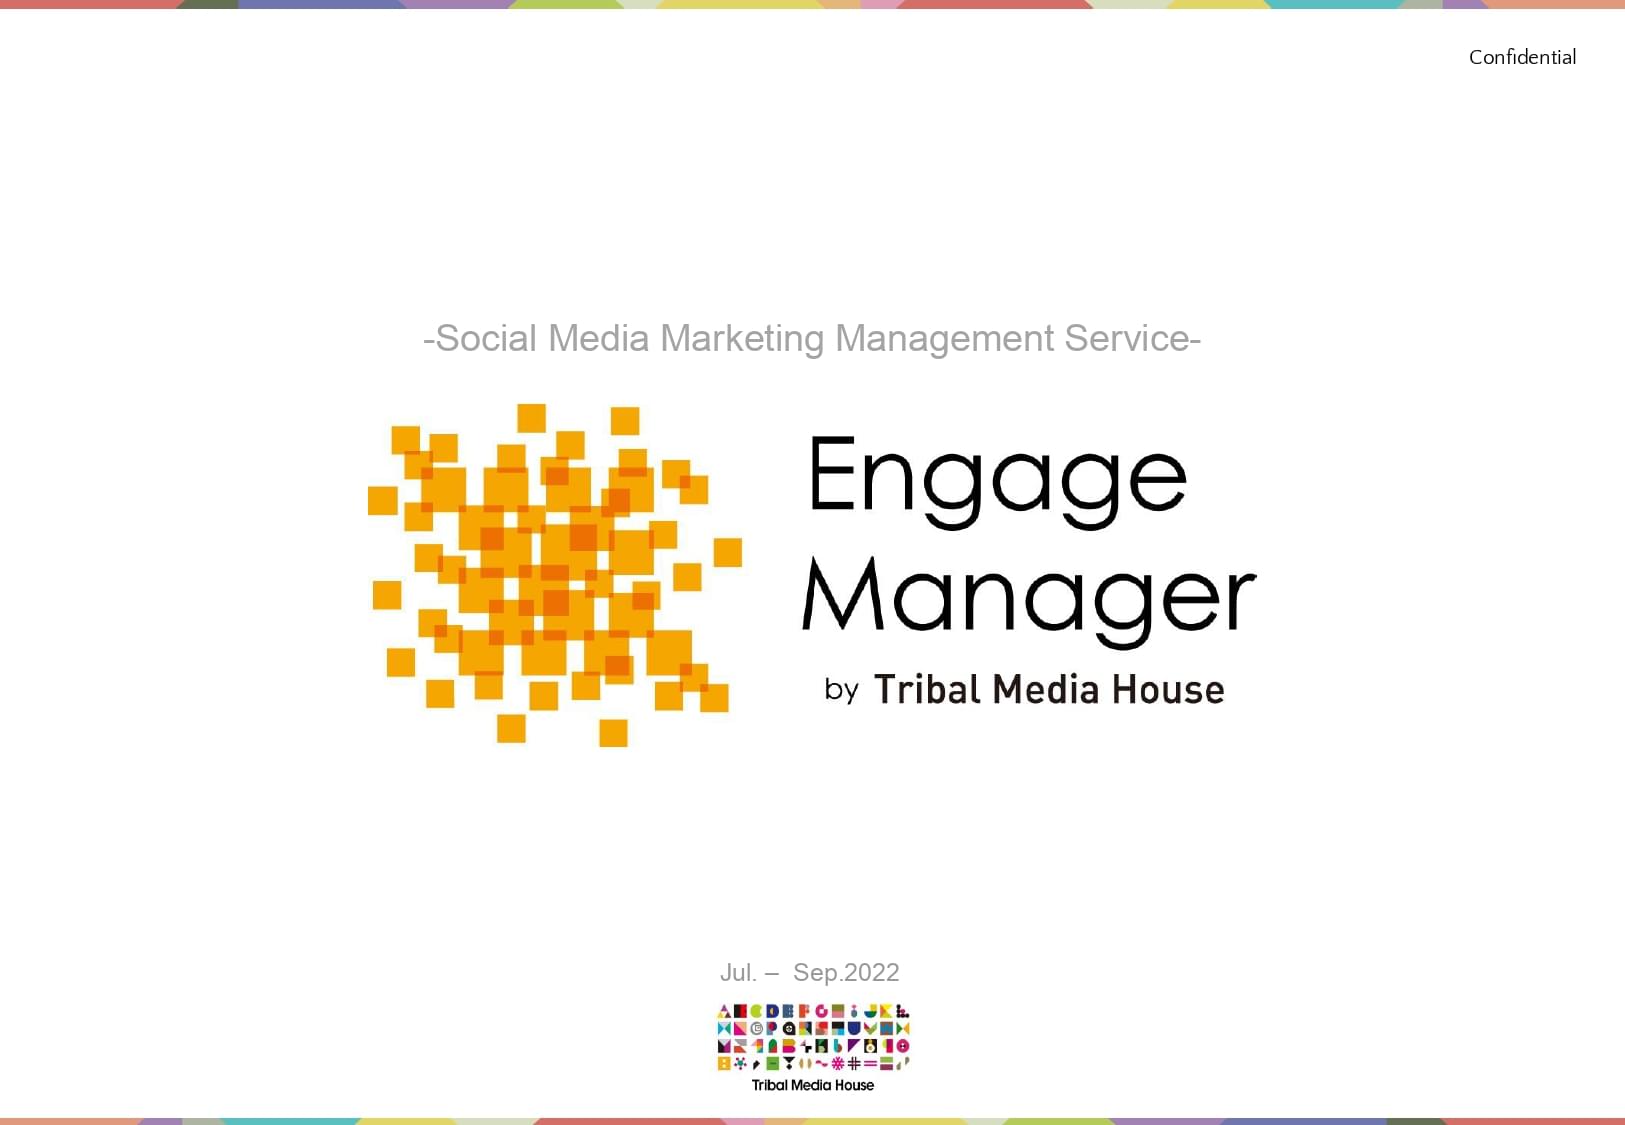 Engage Manager